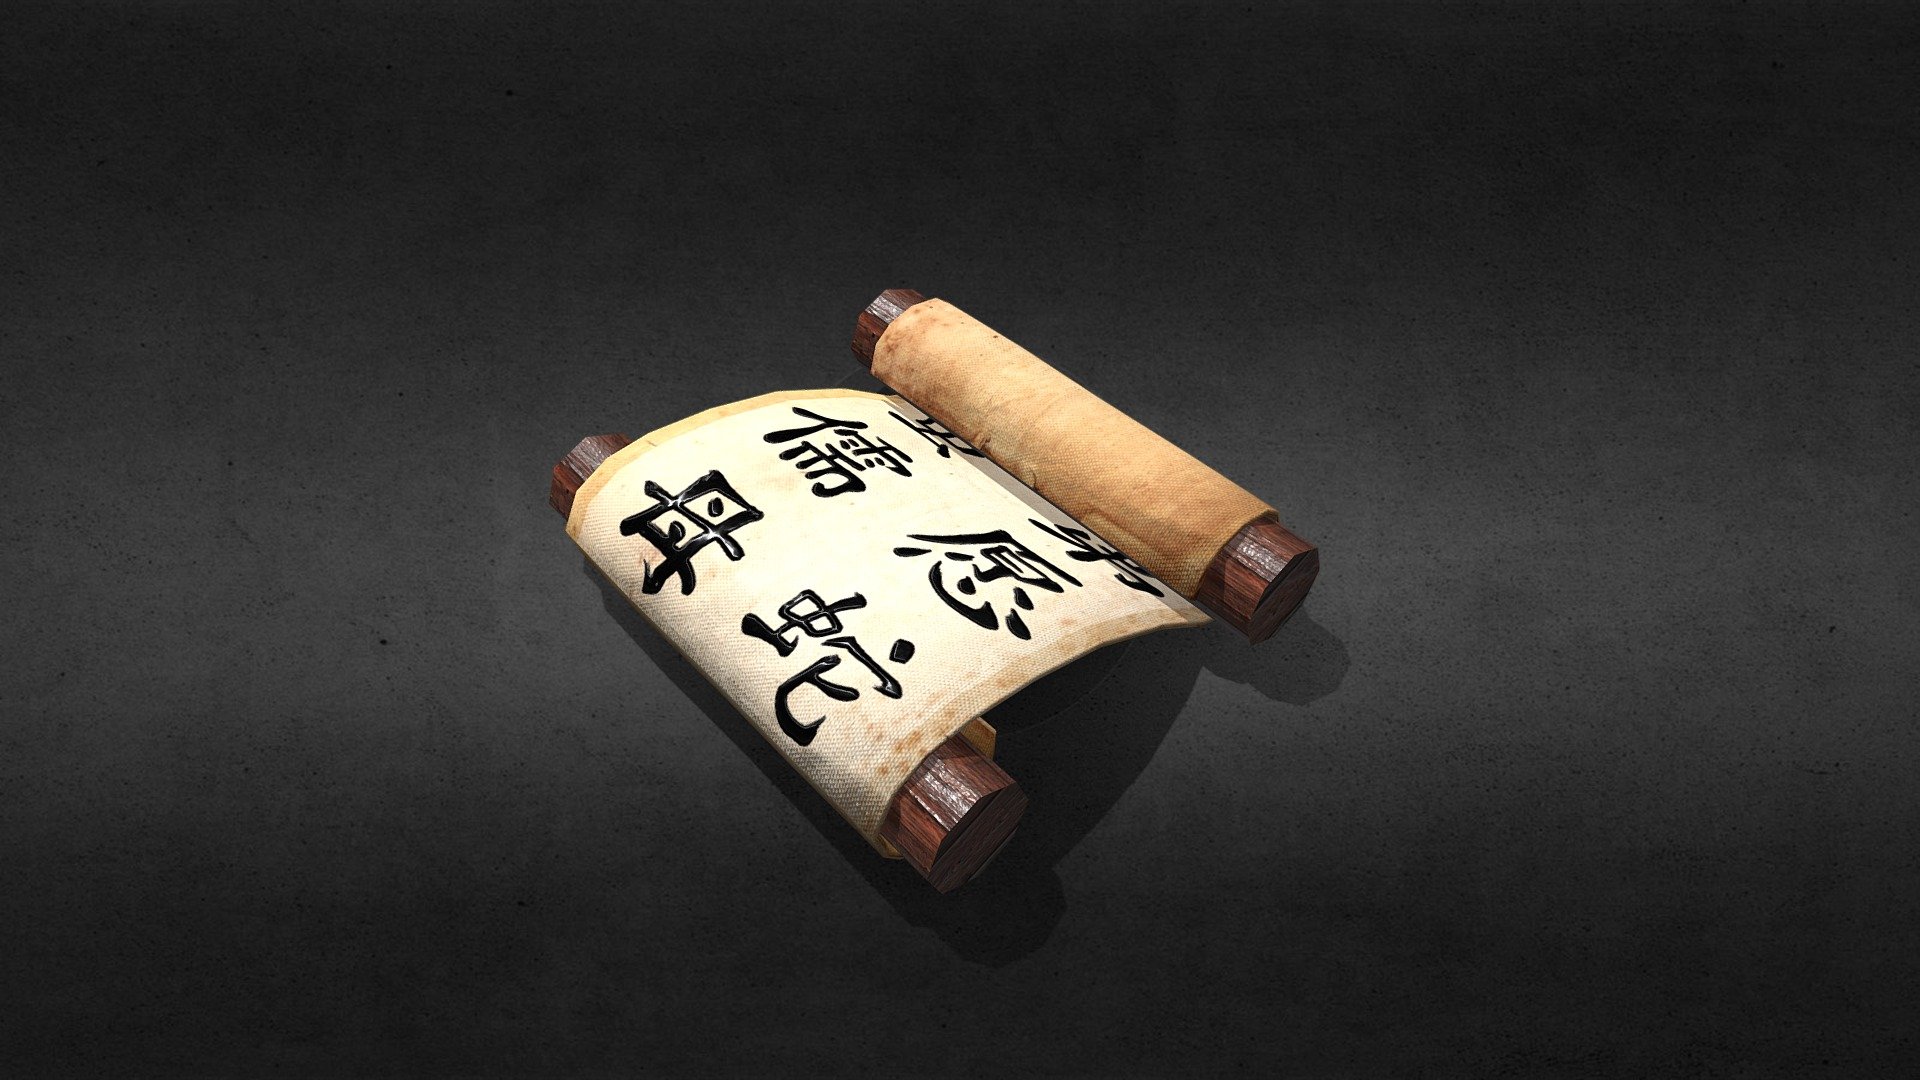 A kanji scroll game prop for Setting Sun.
Used as a loot drop for discovering craftable gear at the blacksmith 3d model